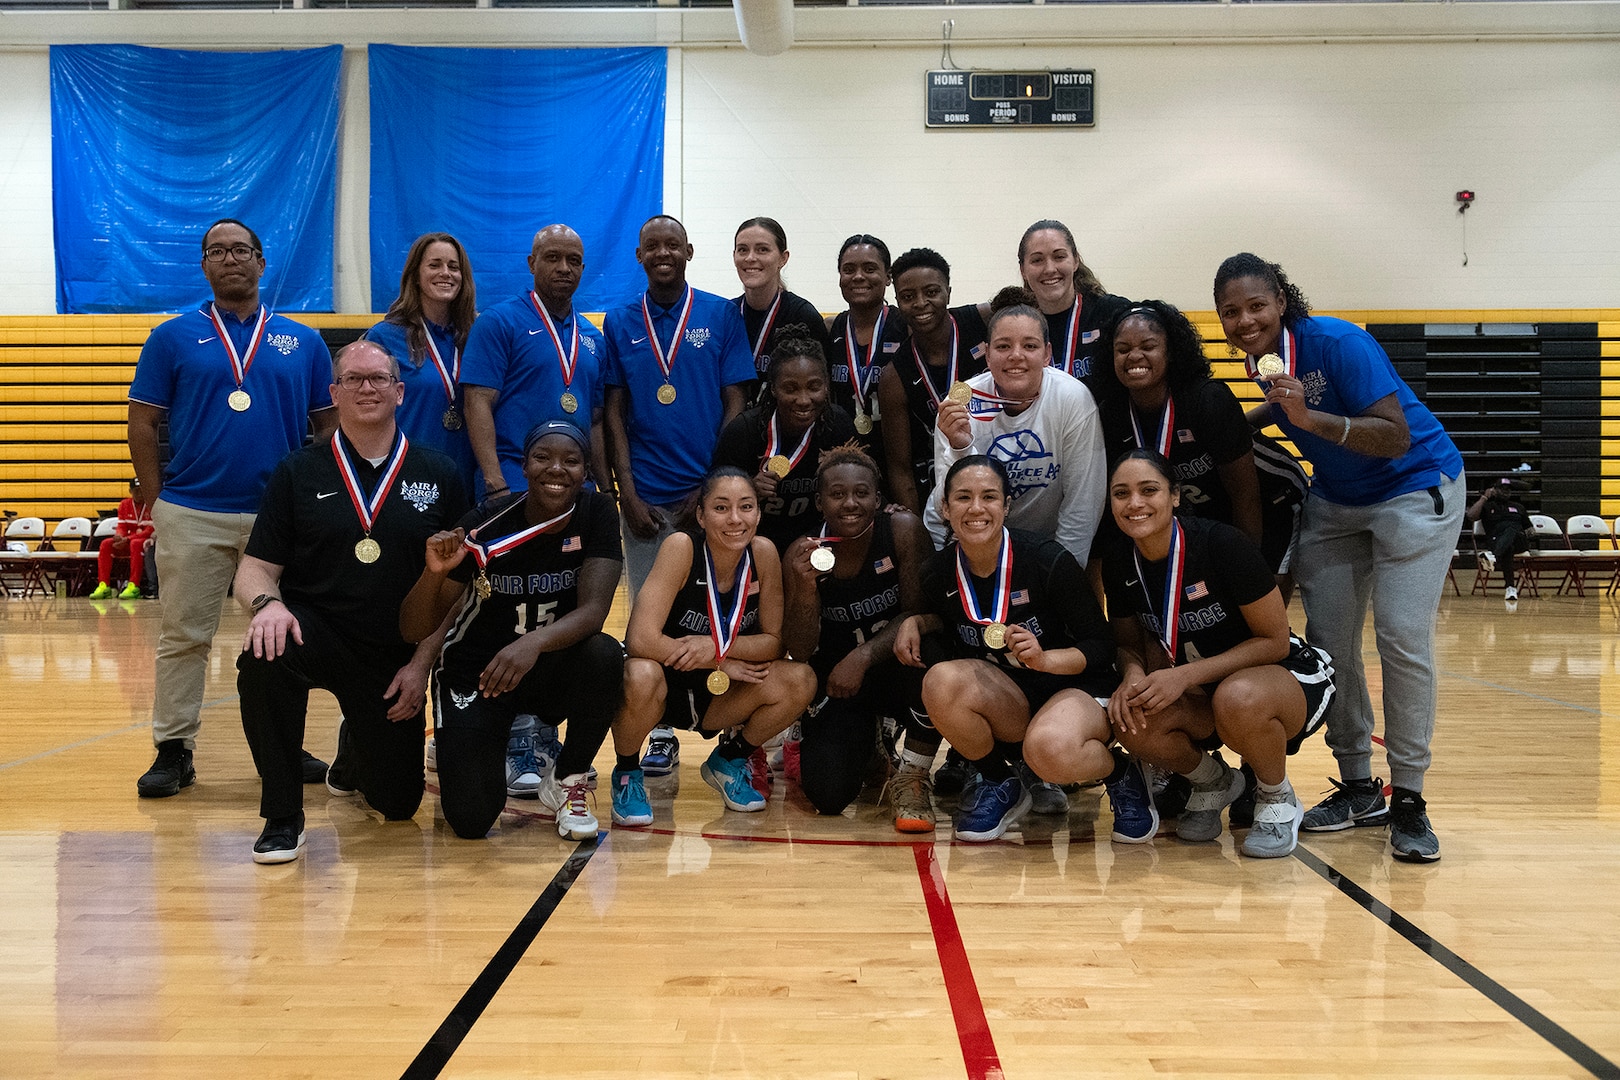 Marine Corps Men win the The 2023 Armed Forces Men’s and Women’s Basketball Championships held at the Smith Fitness Center at Fort Moore, Georgia from 29 October through 6 November. Service members from the Army, Marine Corps, Navy (with Coast Guard players, and Air Force (with Space Force players) battle it out for gold.  (Dept. of Defense photo by EJ Hersom - Released)